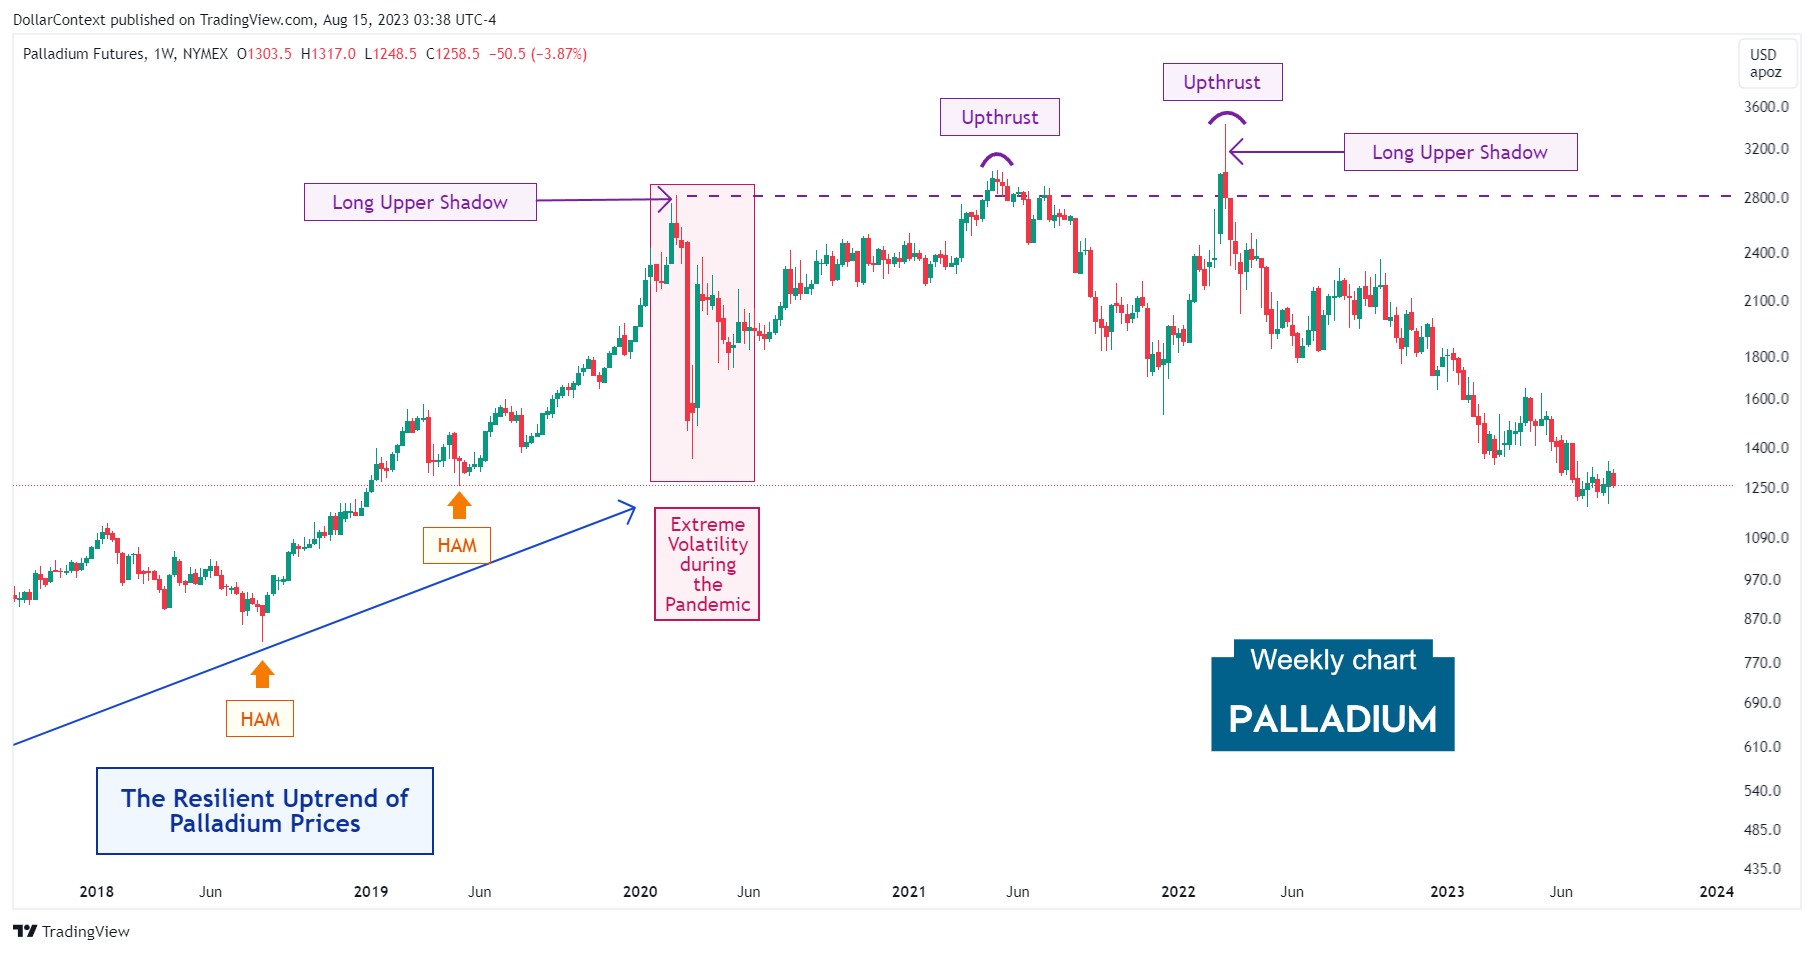 Palladium Futures: Price Rejection Near the Highs